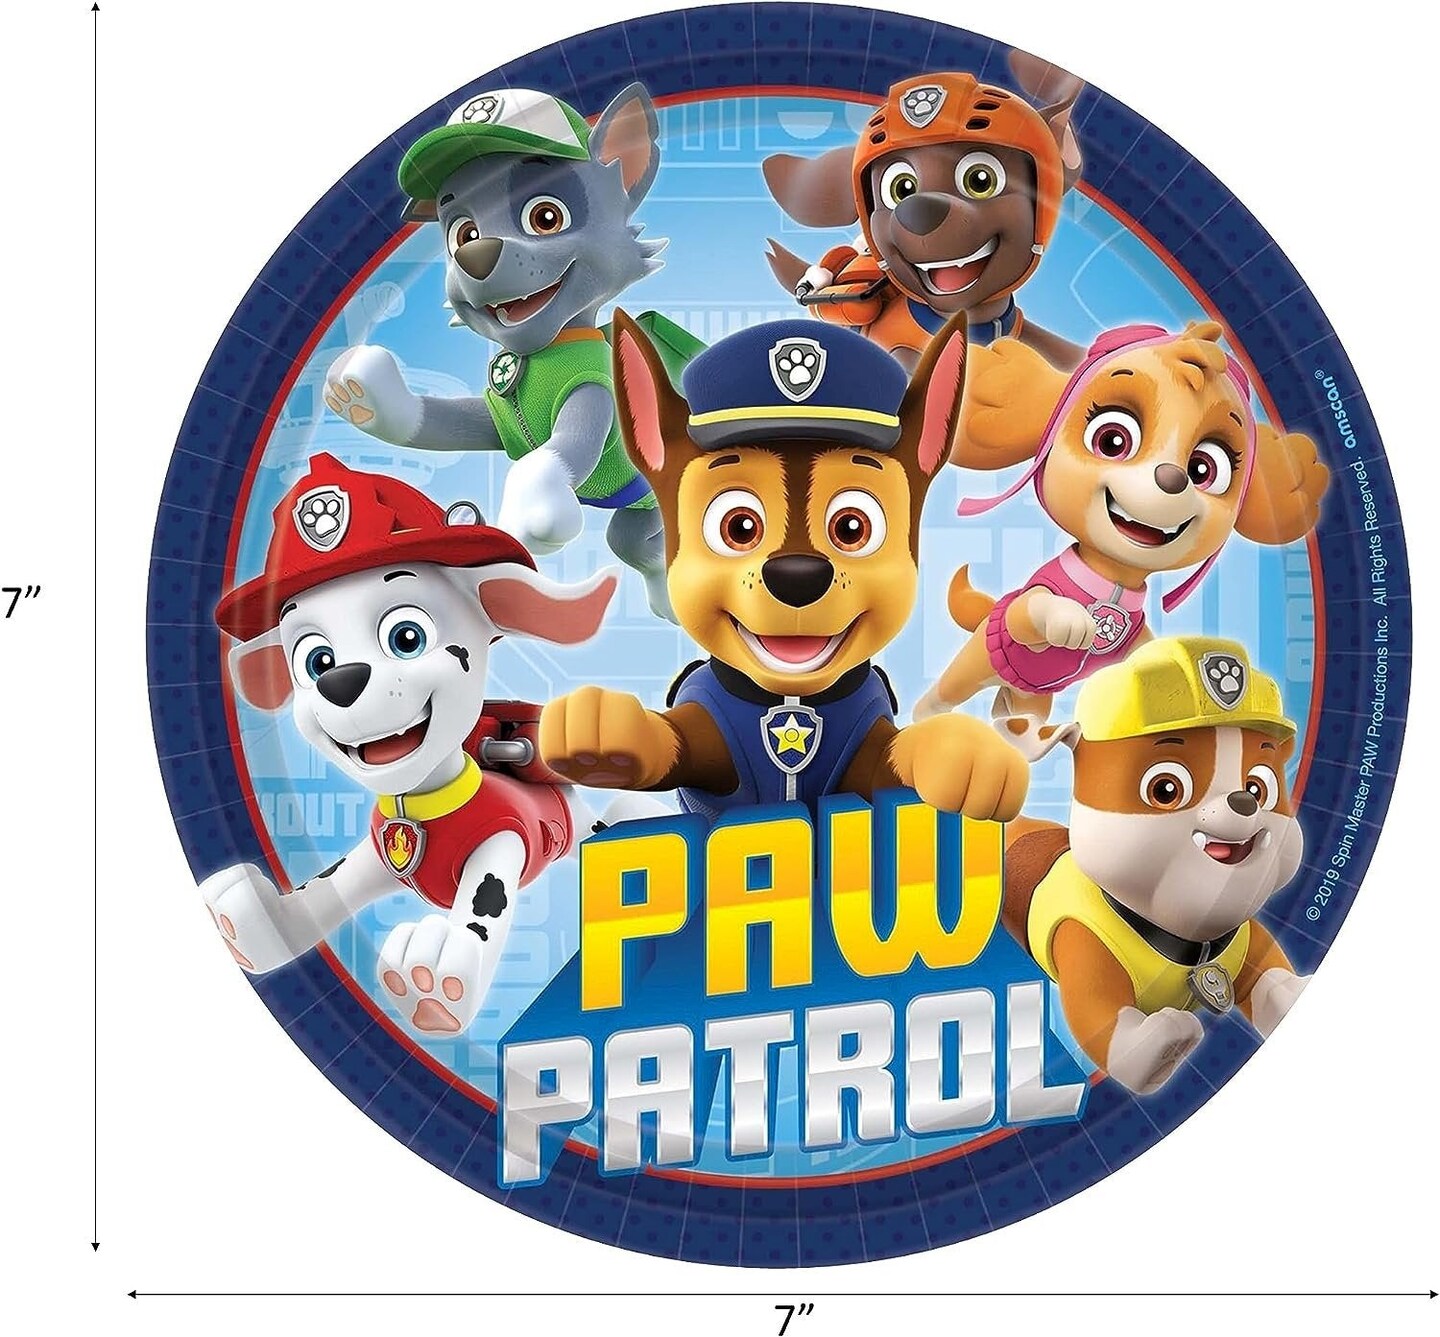 Paw Patrol Birthday Party Supplies Bundle | Paw Patrol Plates | Paw Patrol Napkins | Paw Patrol Cups | Paw Patrol Table Cover | Paw Patrol Decorations (Pack for 16)